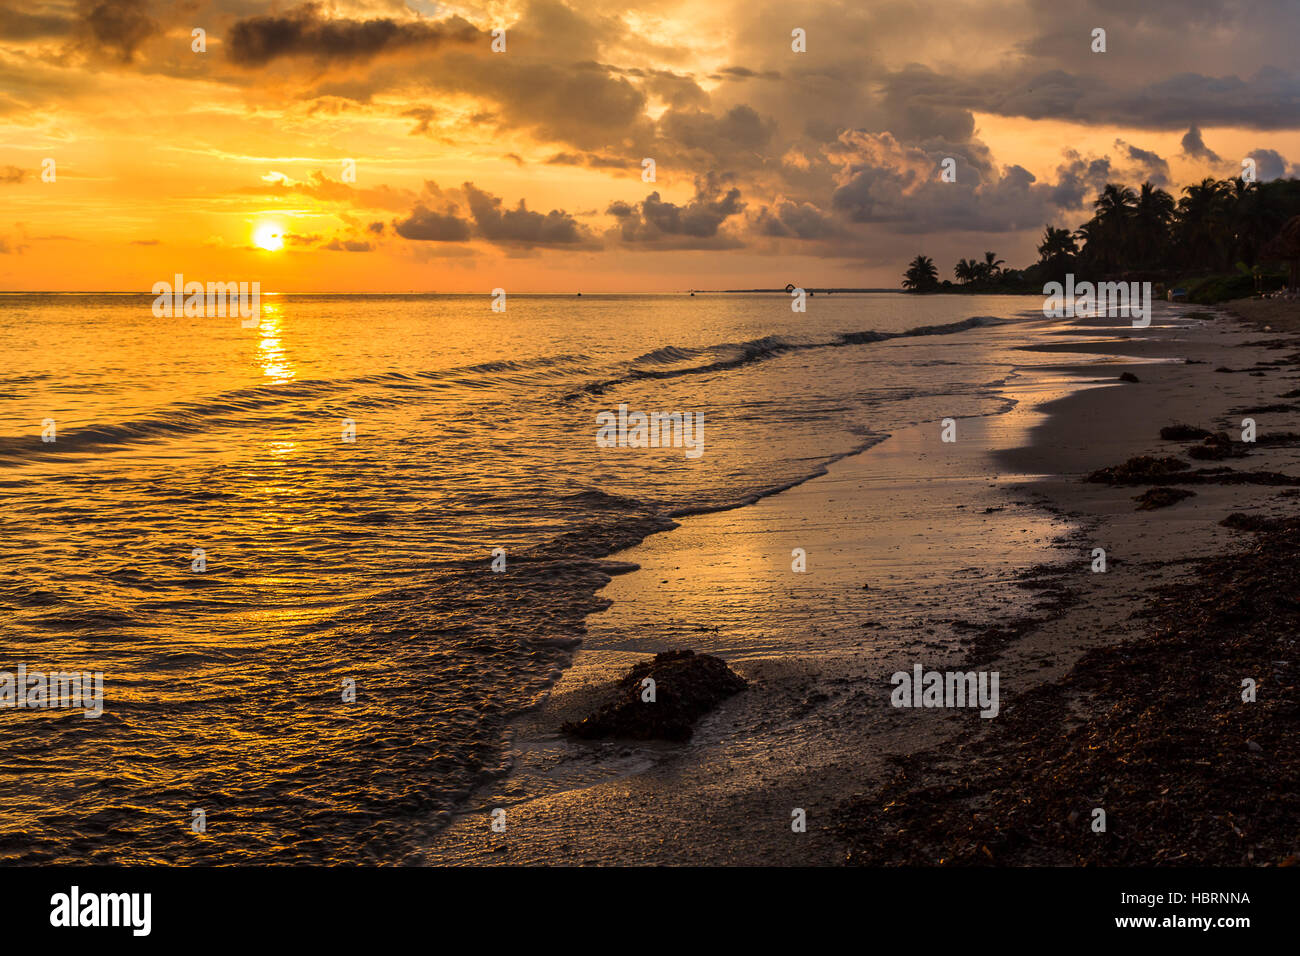 The sun begins to lift over the shallow waters & lagoons of Cayo Guillermo in Cuba. Stock Photo